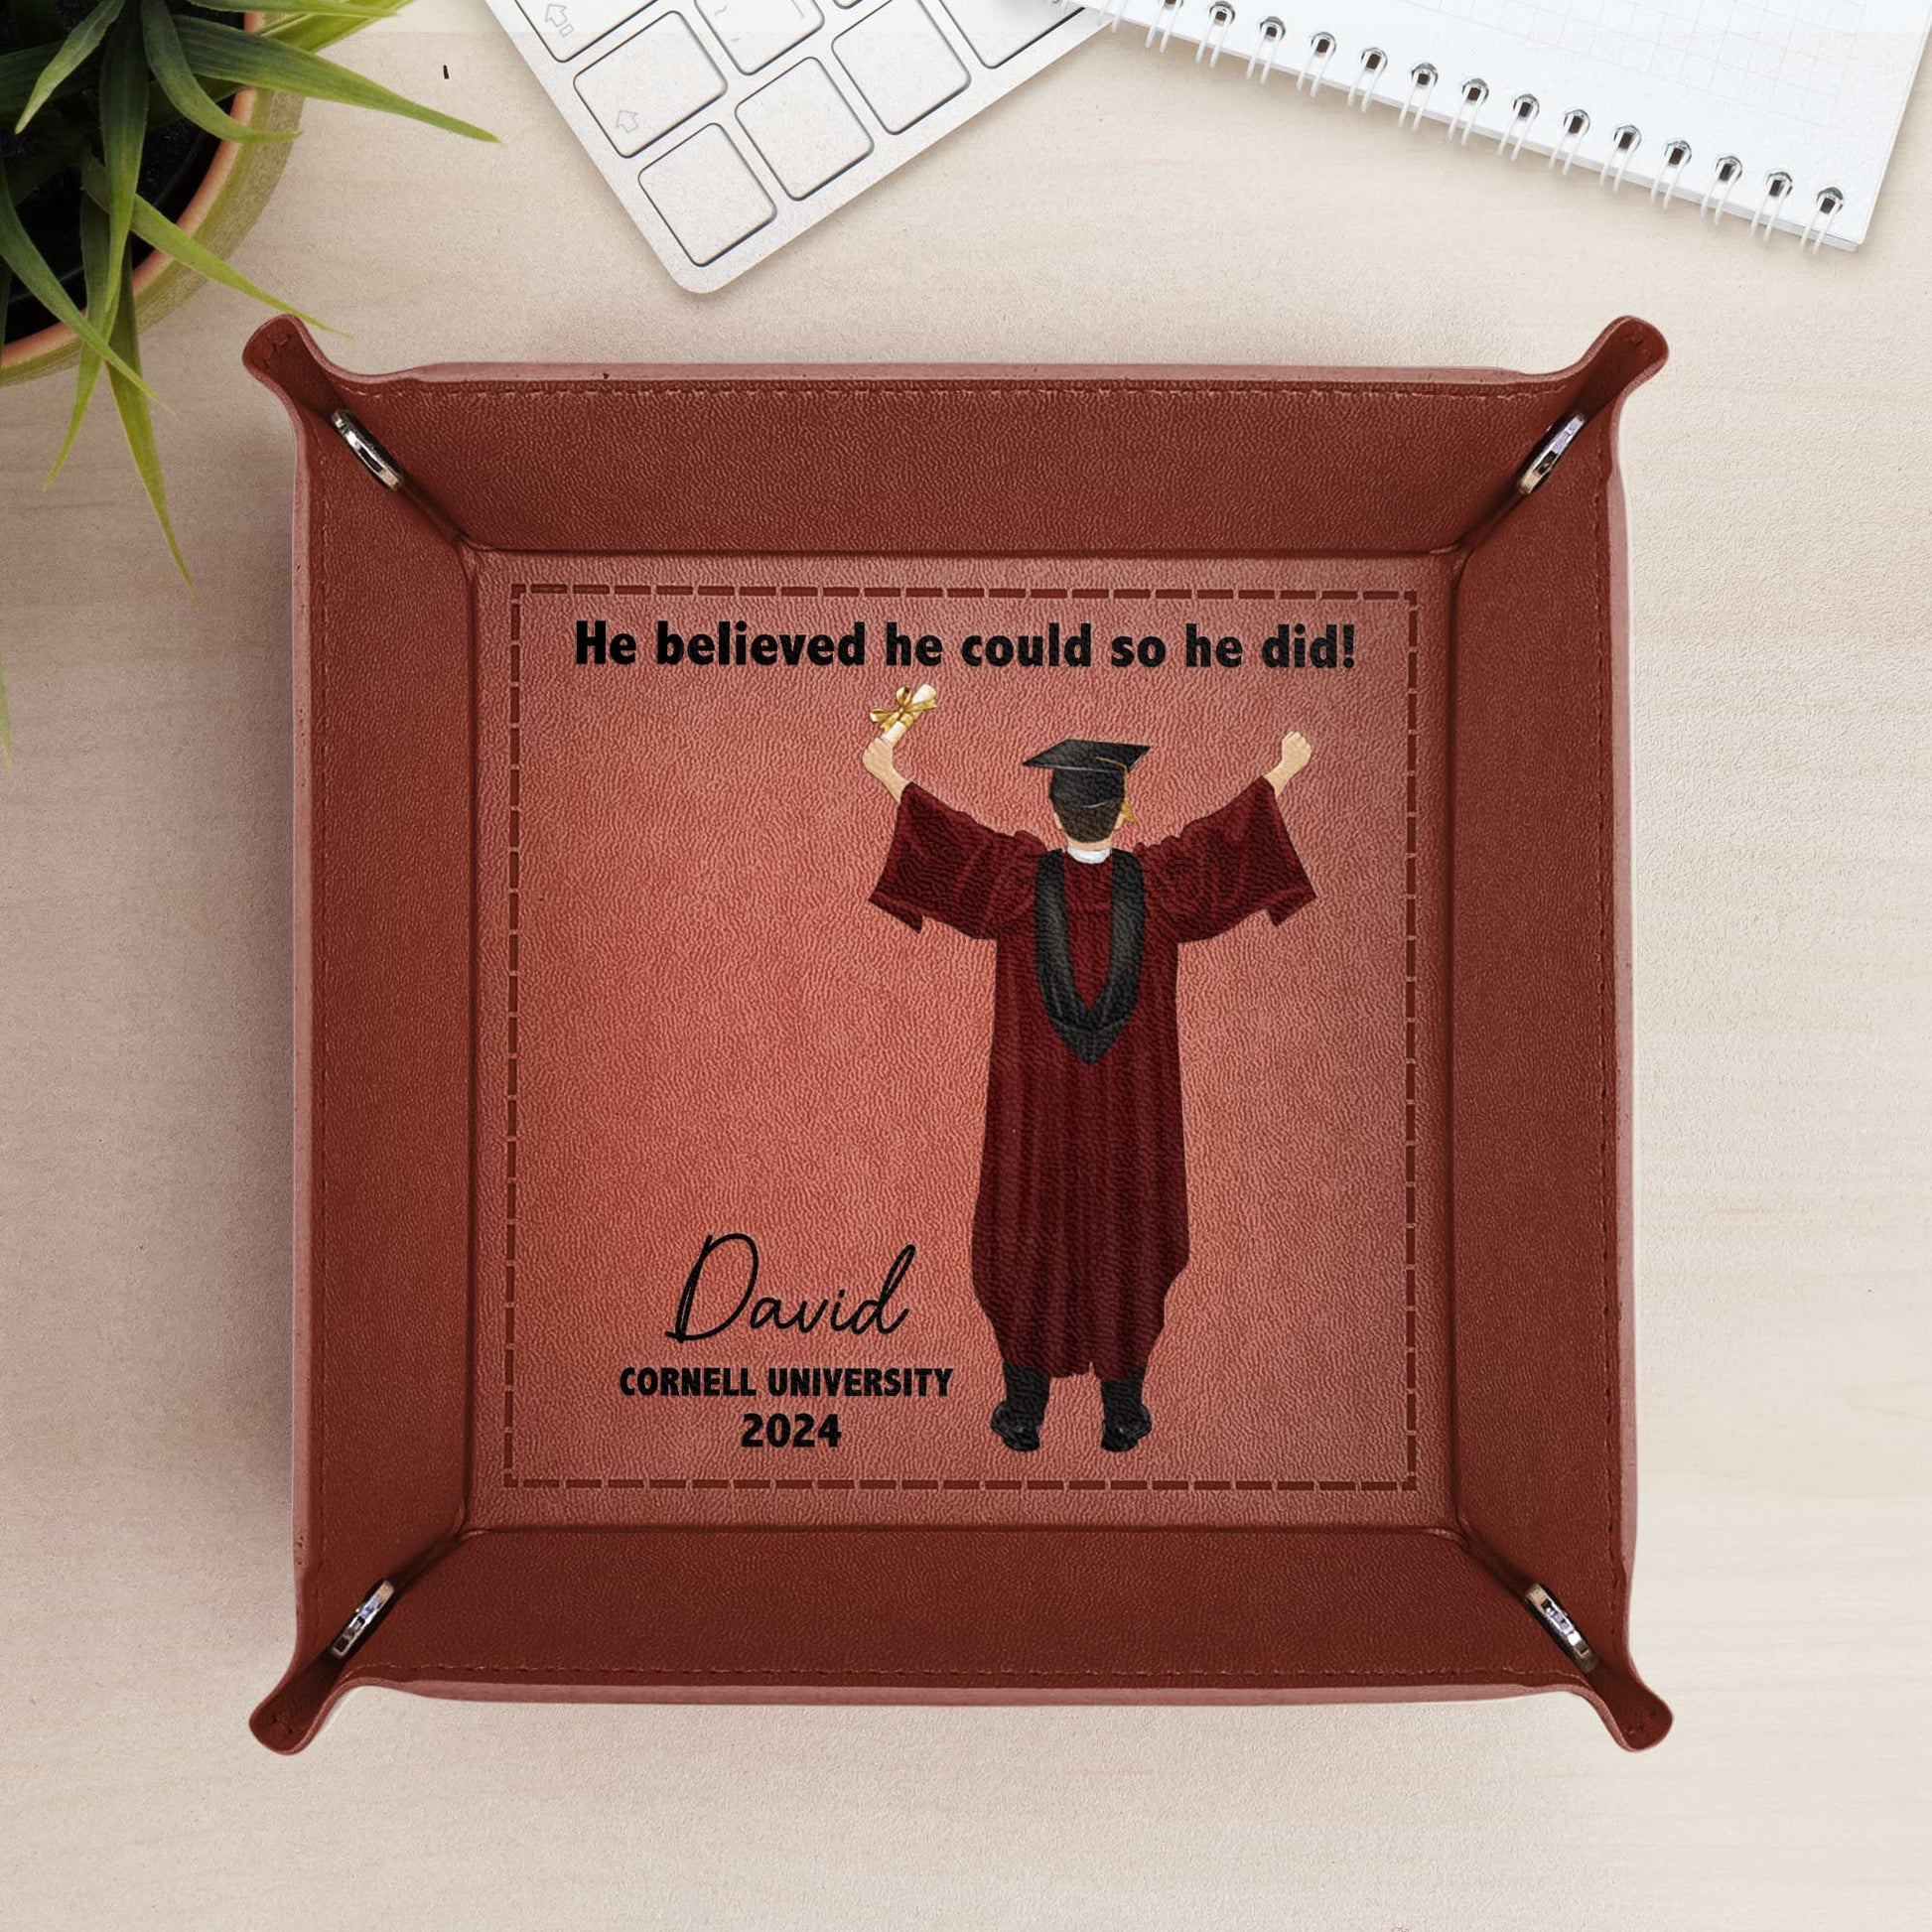 Graduation Gift He Believed He Could So He Did! - Personalized Leather Valet Tray